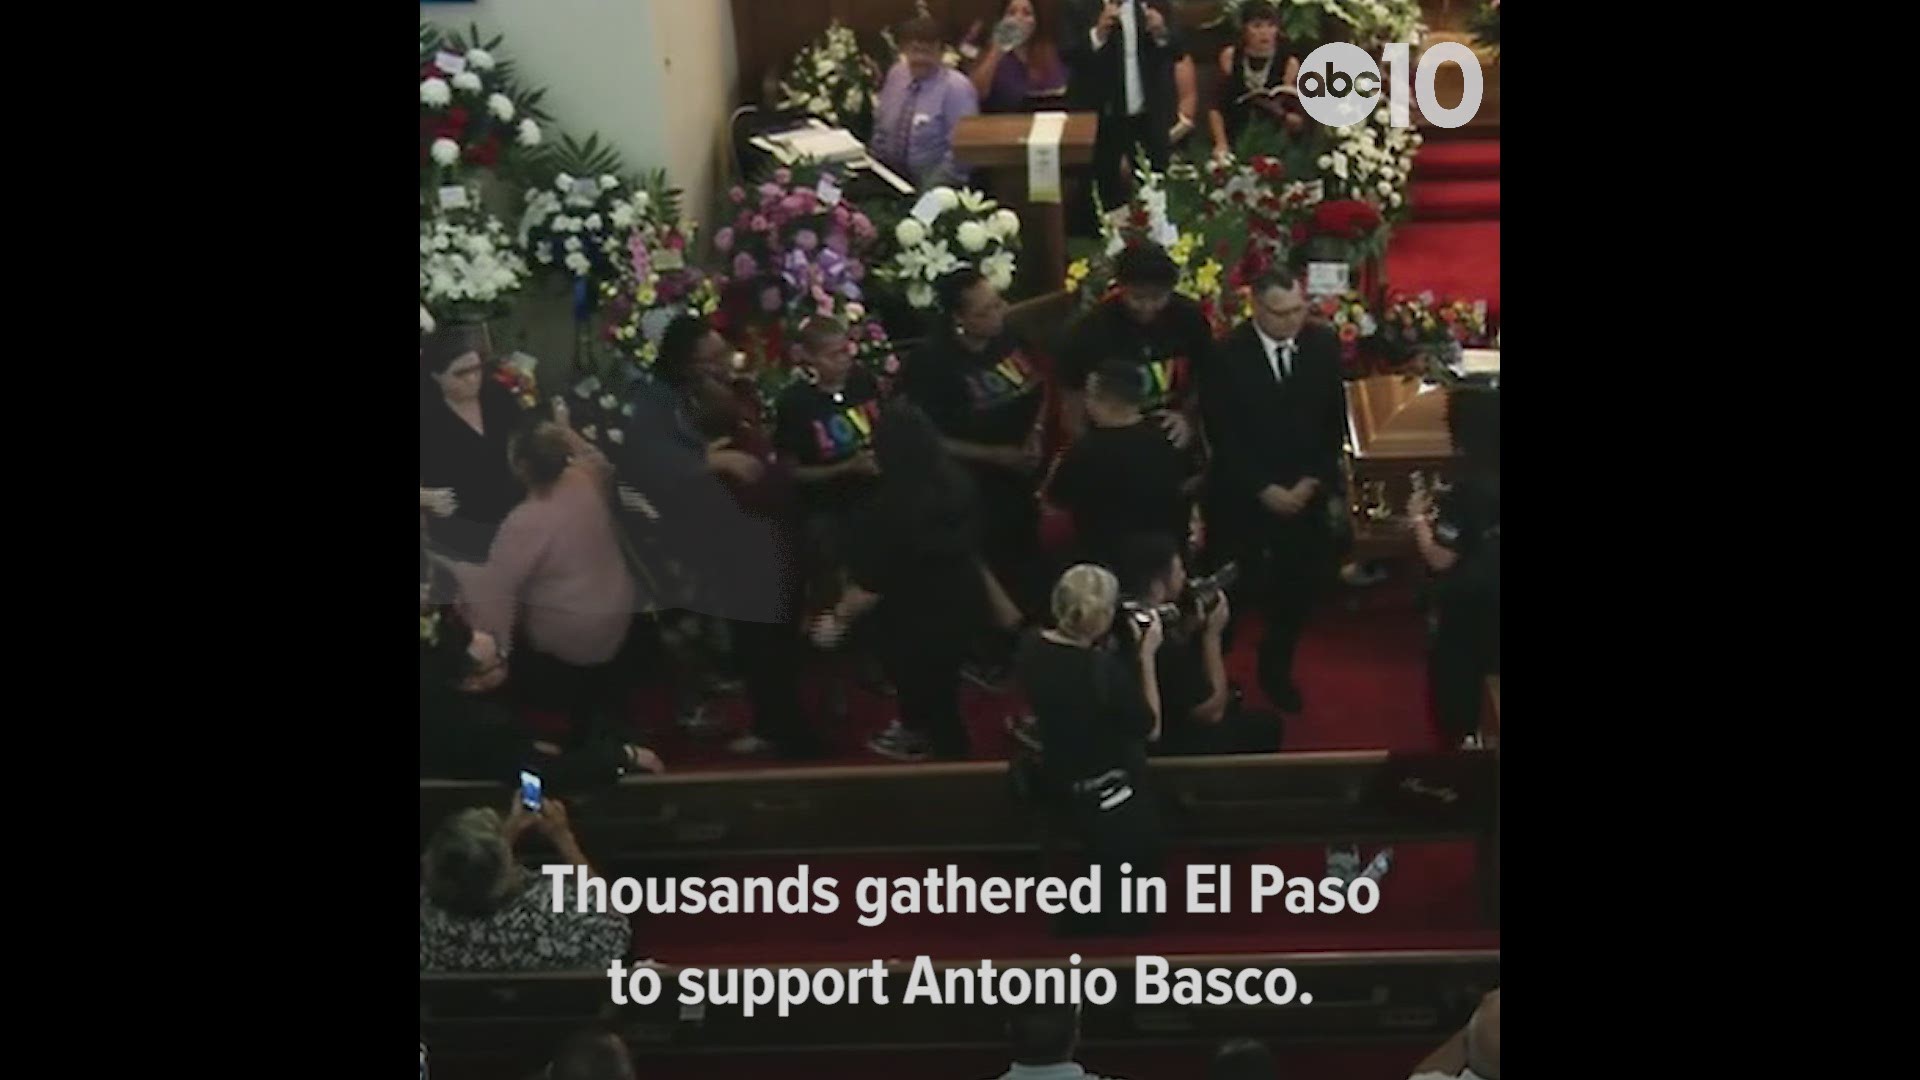 Antonio Basco thought he would be alone mourning his wife who died in the El Paso shooting. But a simple request has led to an outpouring of support.